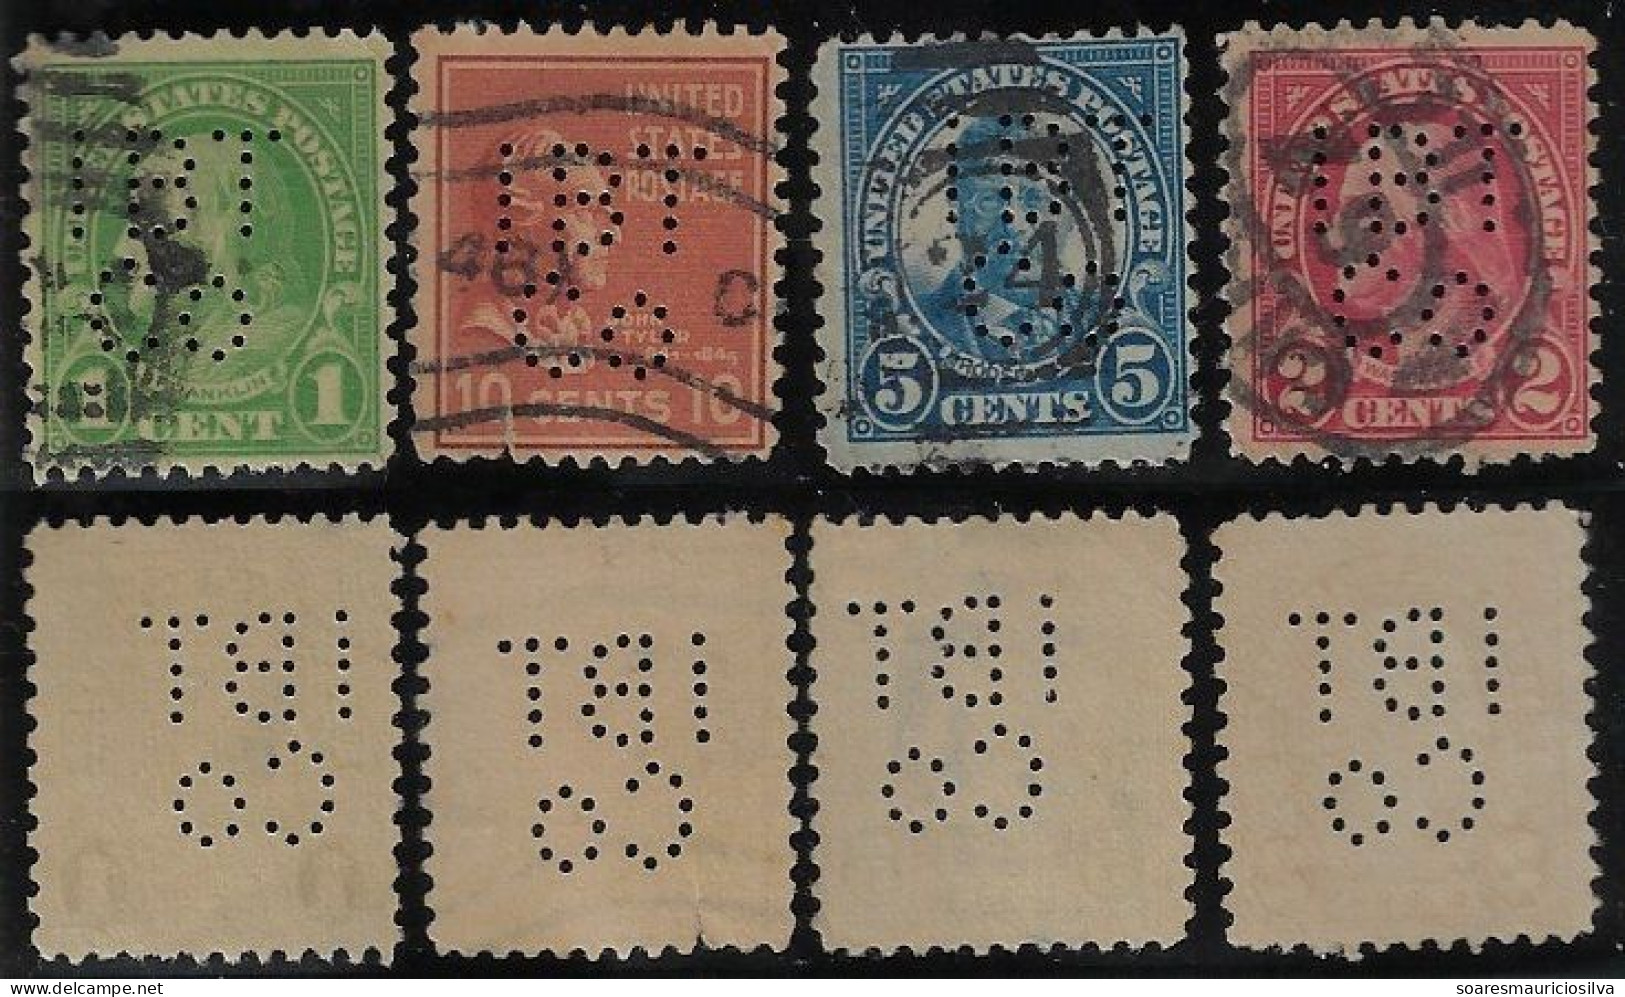 USA United States 1917/1960 4 Stamp Perfin IBT/Co By Illinois Bell Telephone Company From Chicago Lochung Perfore - Zähnungen (Perfins)